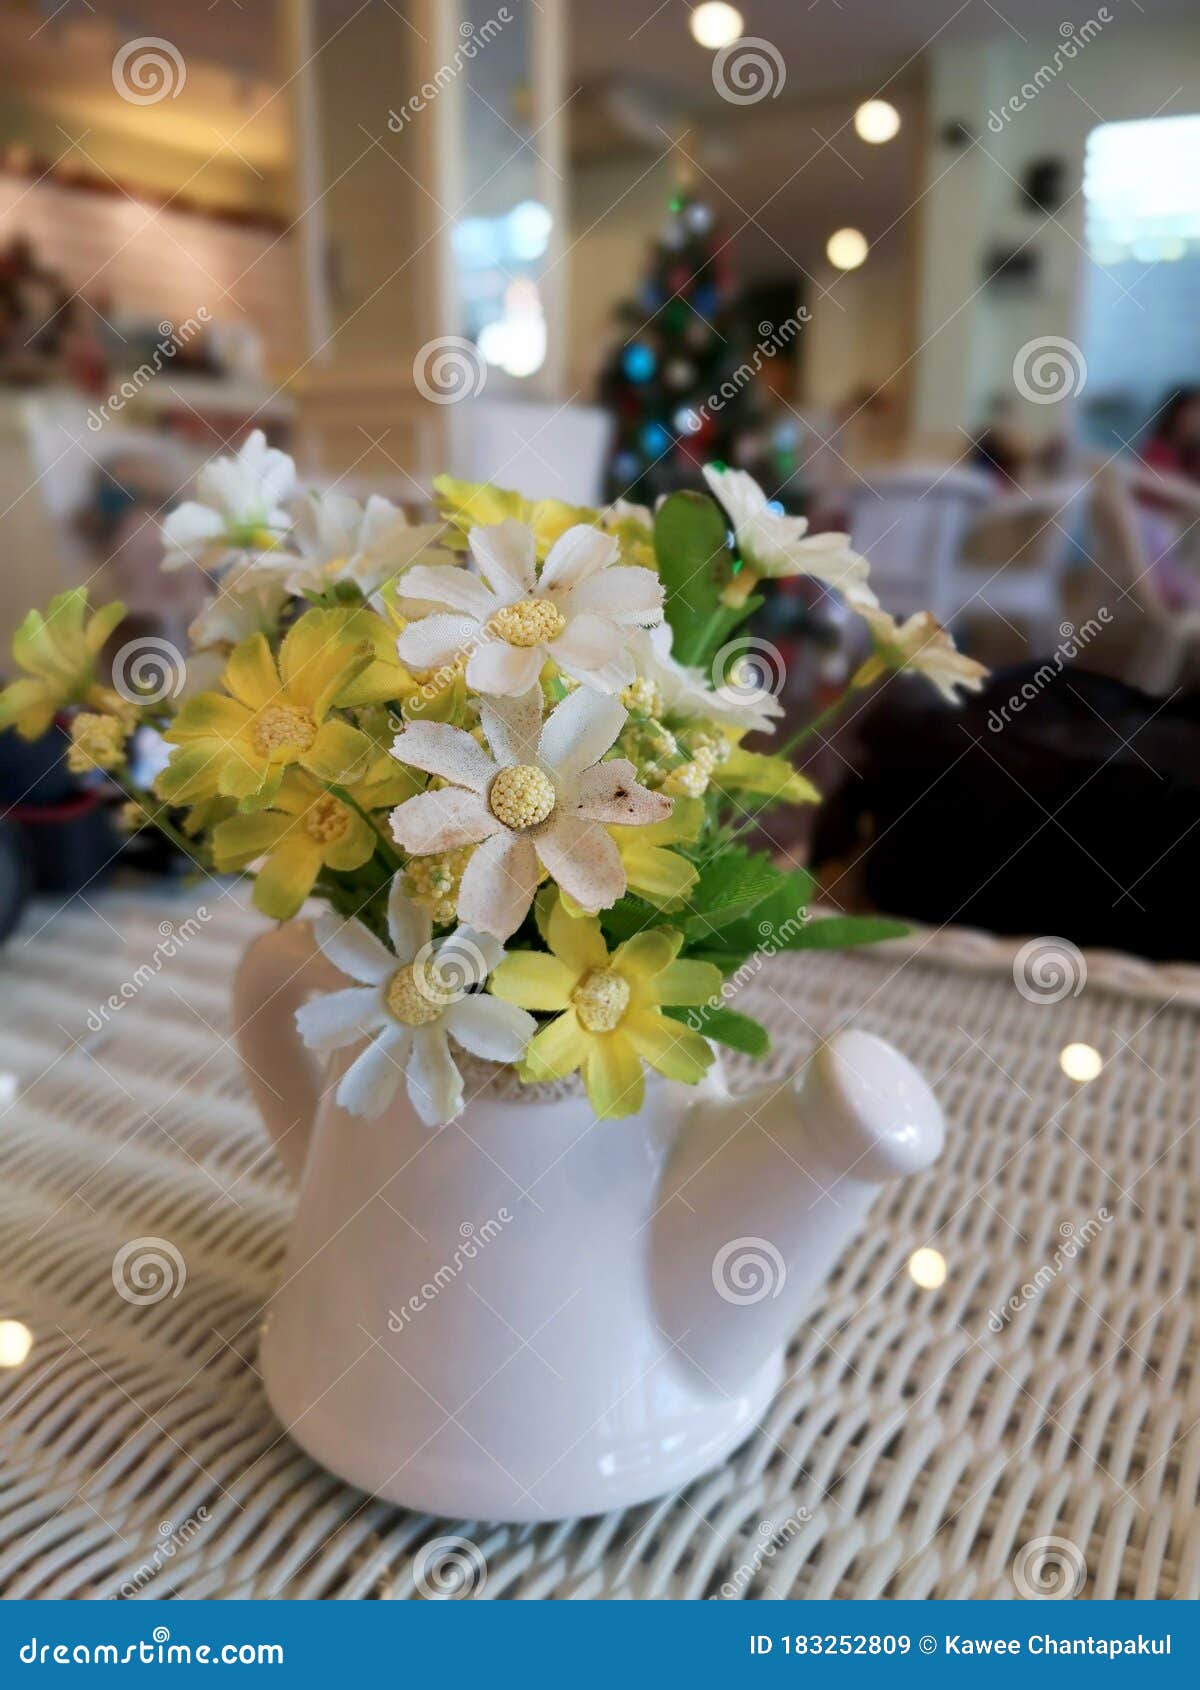 flower pot against a blurry background